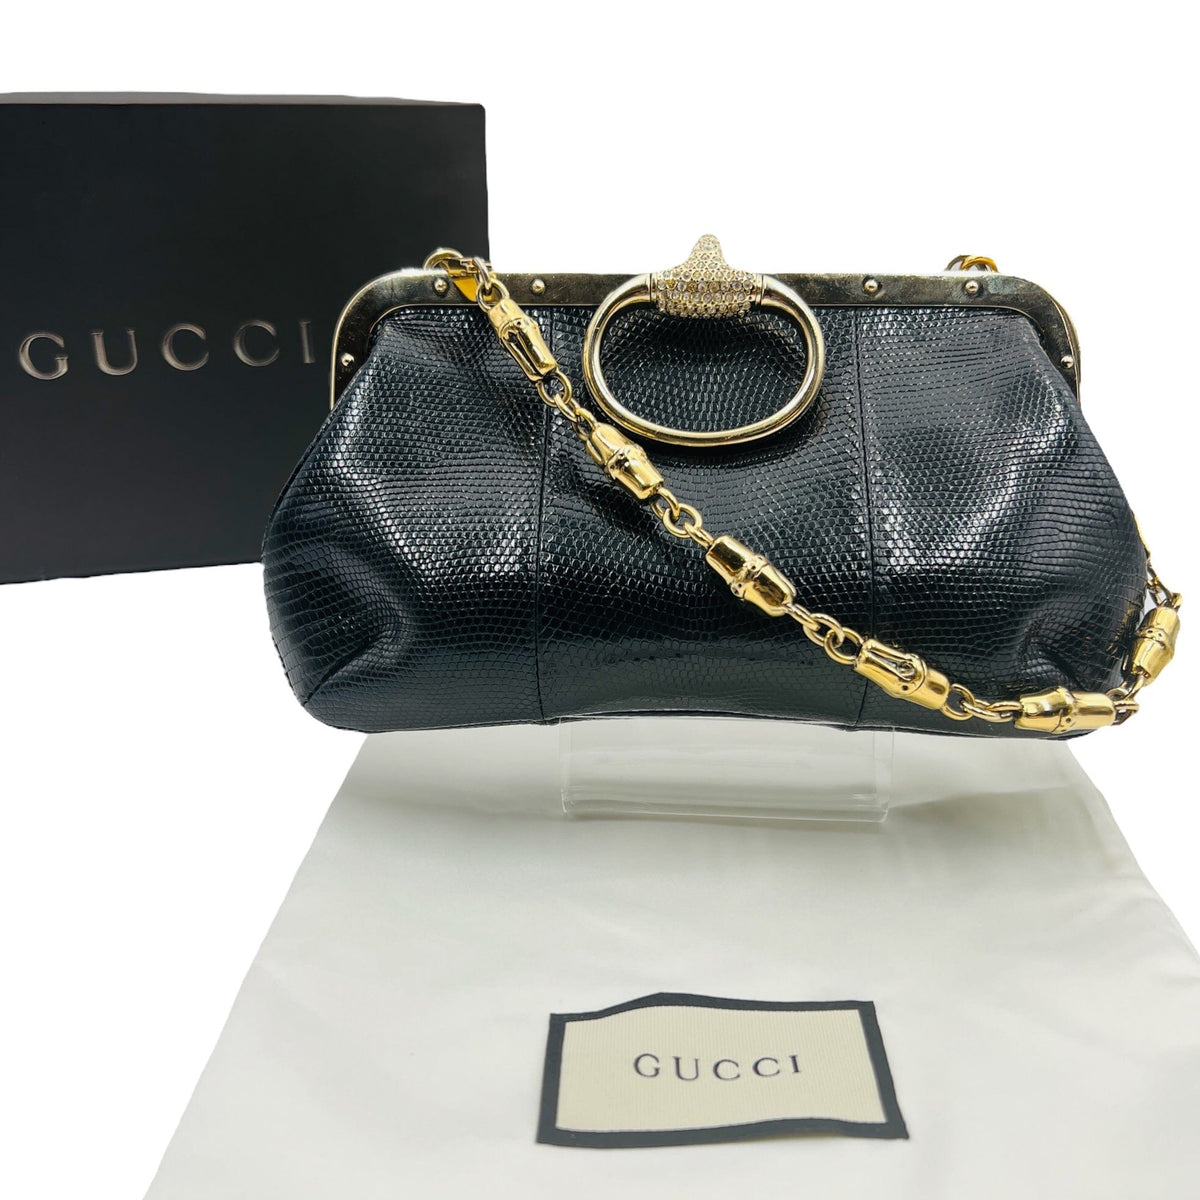 Gucci, Bags, Rare Gucci By Tom Ford Lizard And Python Bag